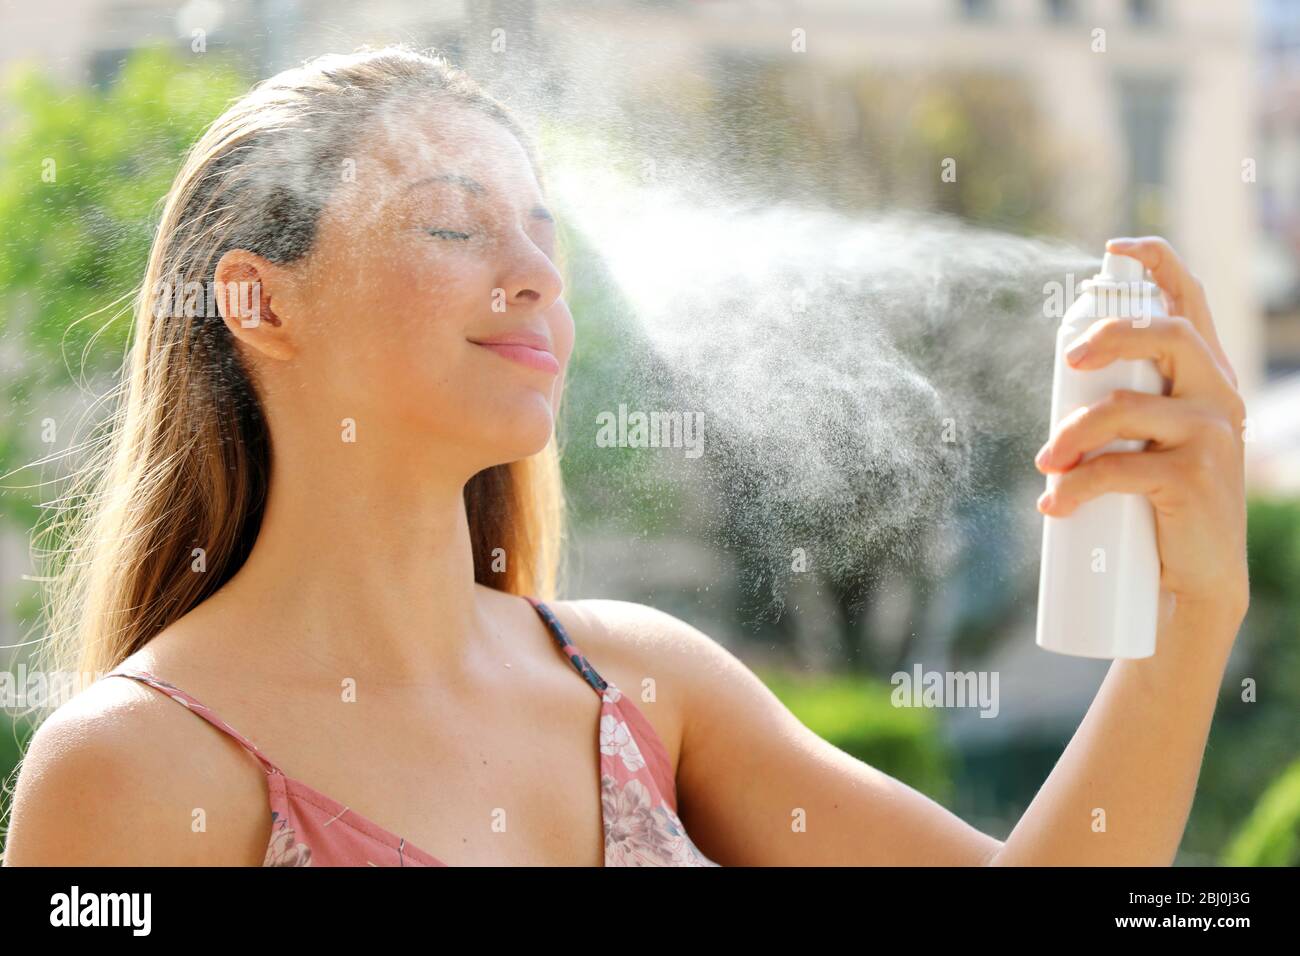 Young woman spraying Thermal Water on her face outside. Thermal water used for skin care, fix makeup, help skin irritation, redness and insect bites. Stock Photo